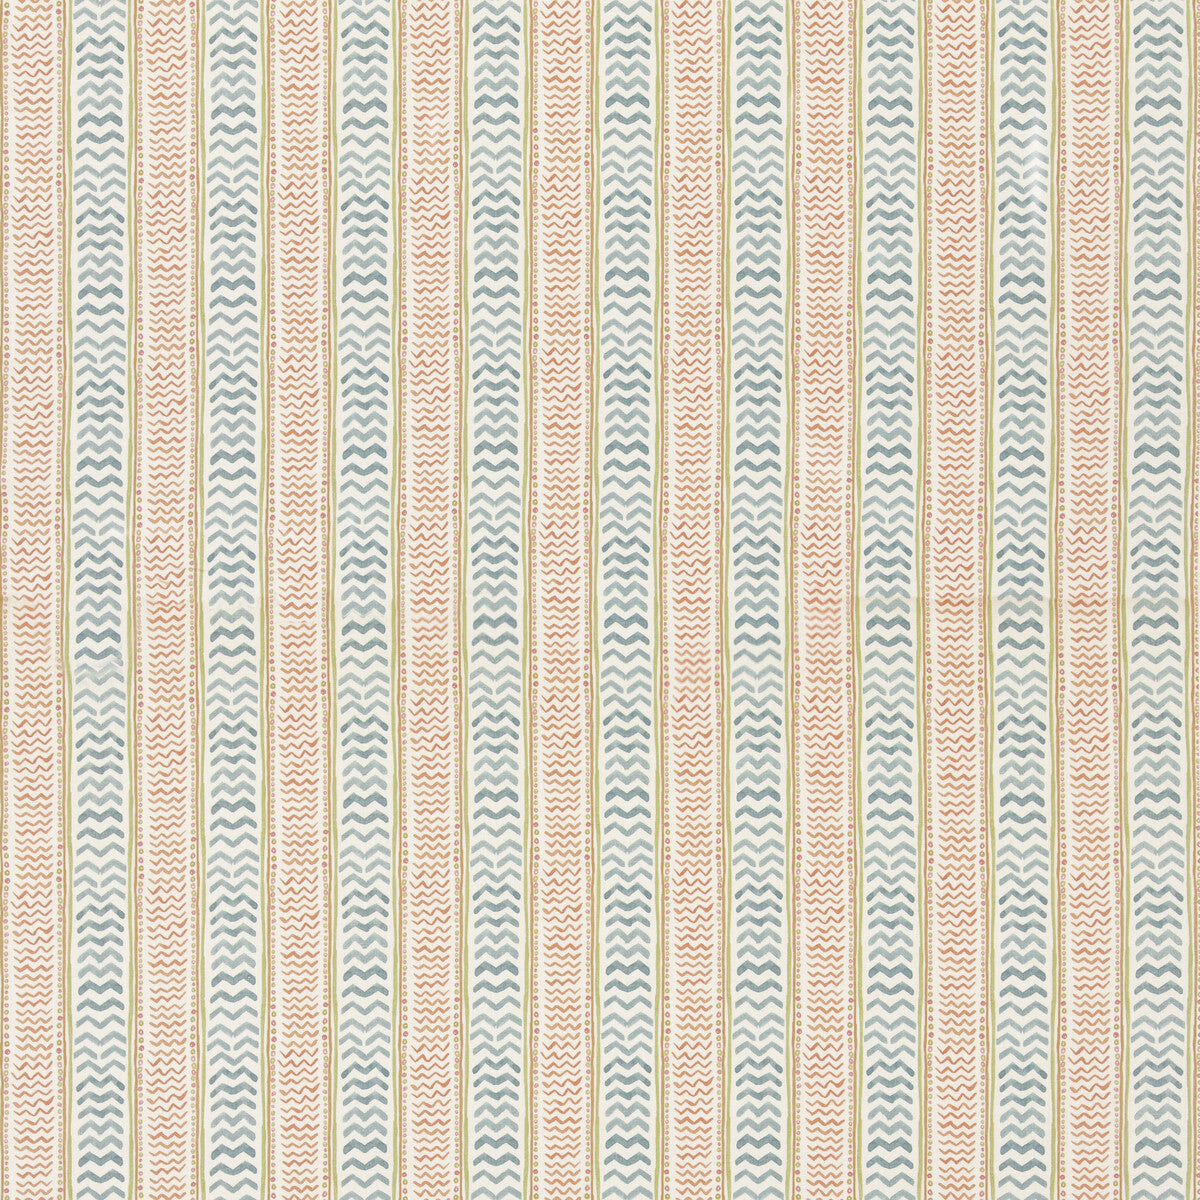 Wriggle Room fabric in teal/spice color - pattern BP11050.5.0 - by G P &amp; J Baker in the X Kit Kemp Prints And Embroideries collection